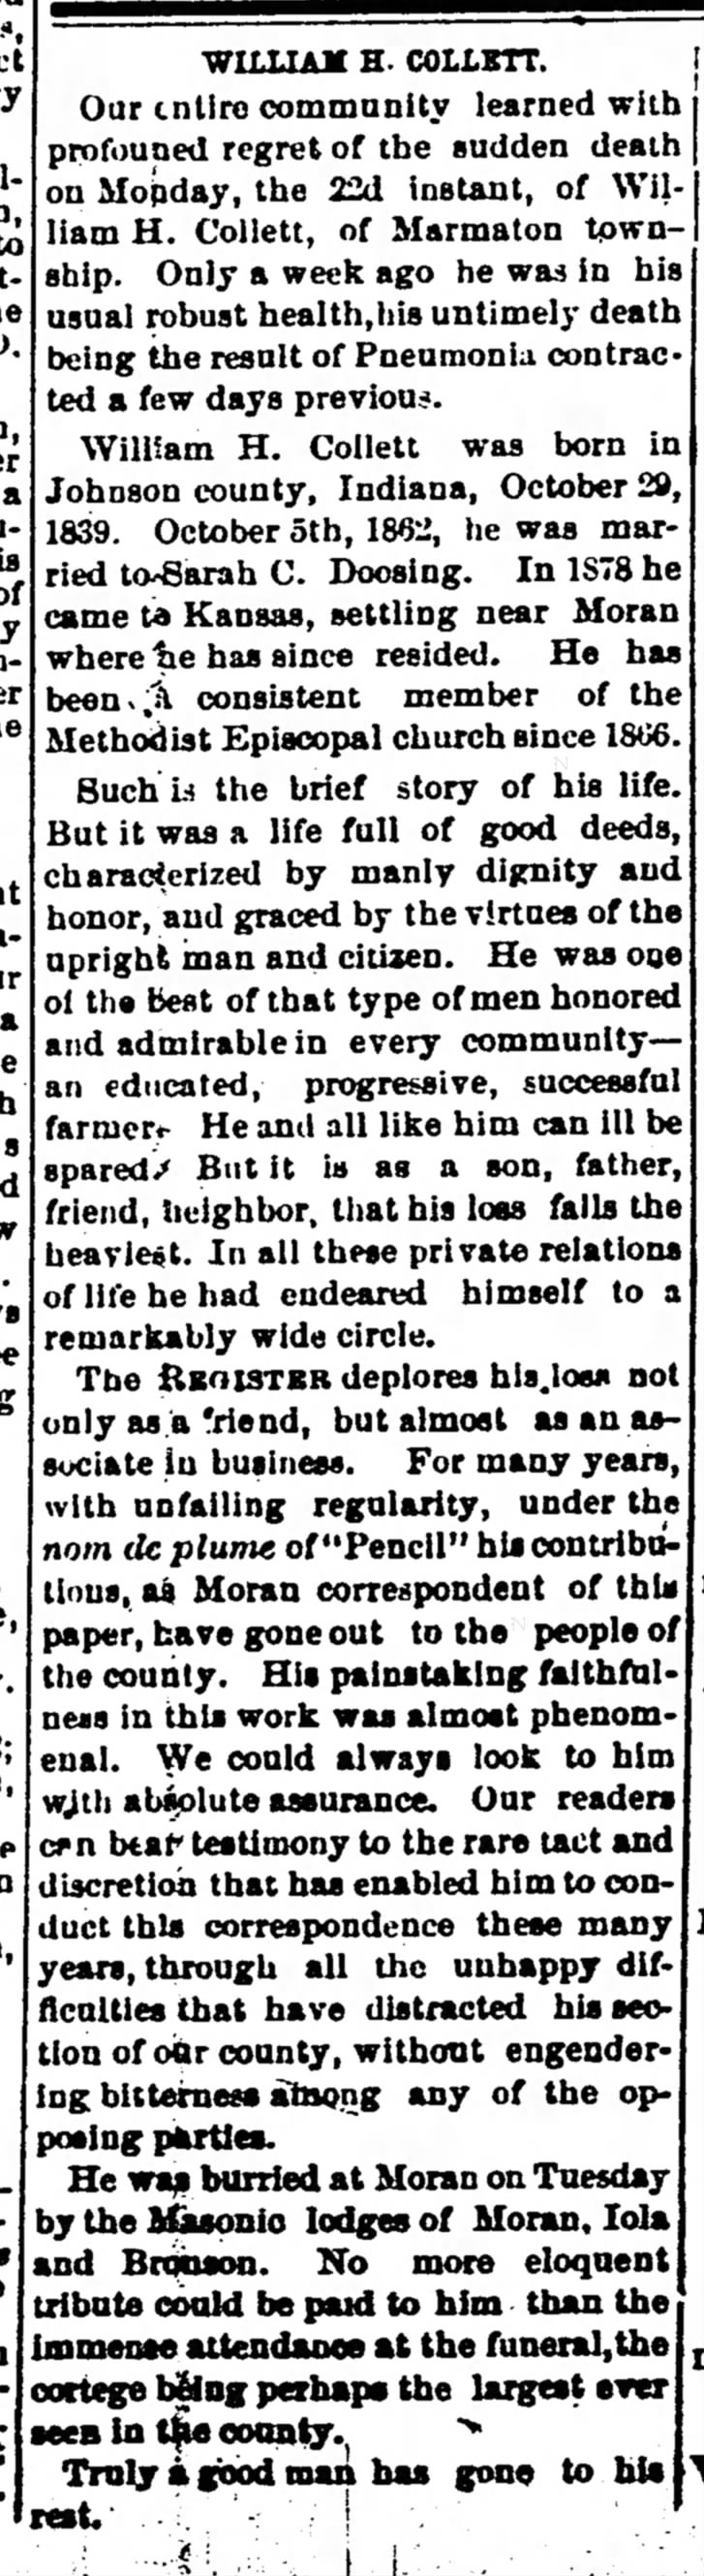 William H. Collett Obituary Iola Register 25 May 1888 Page 5 Column 6